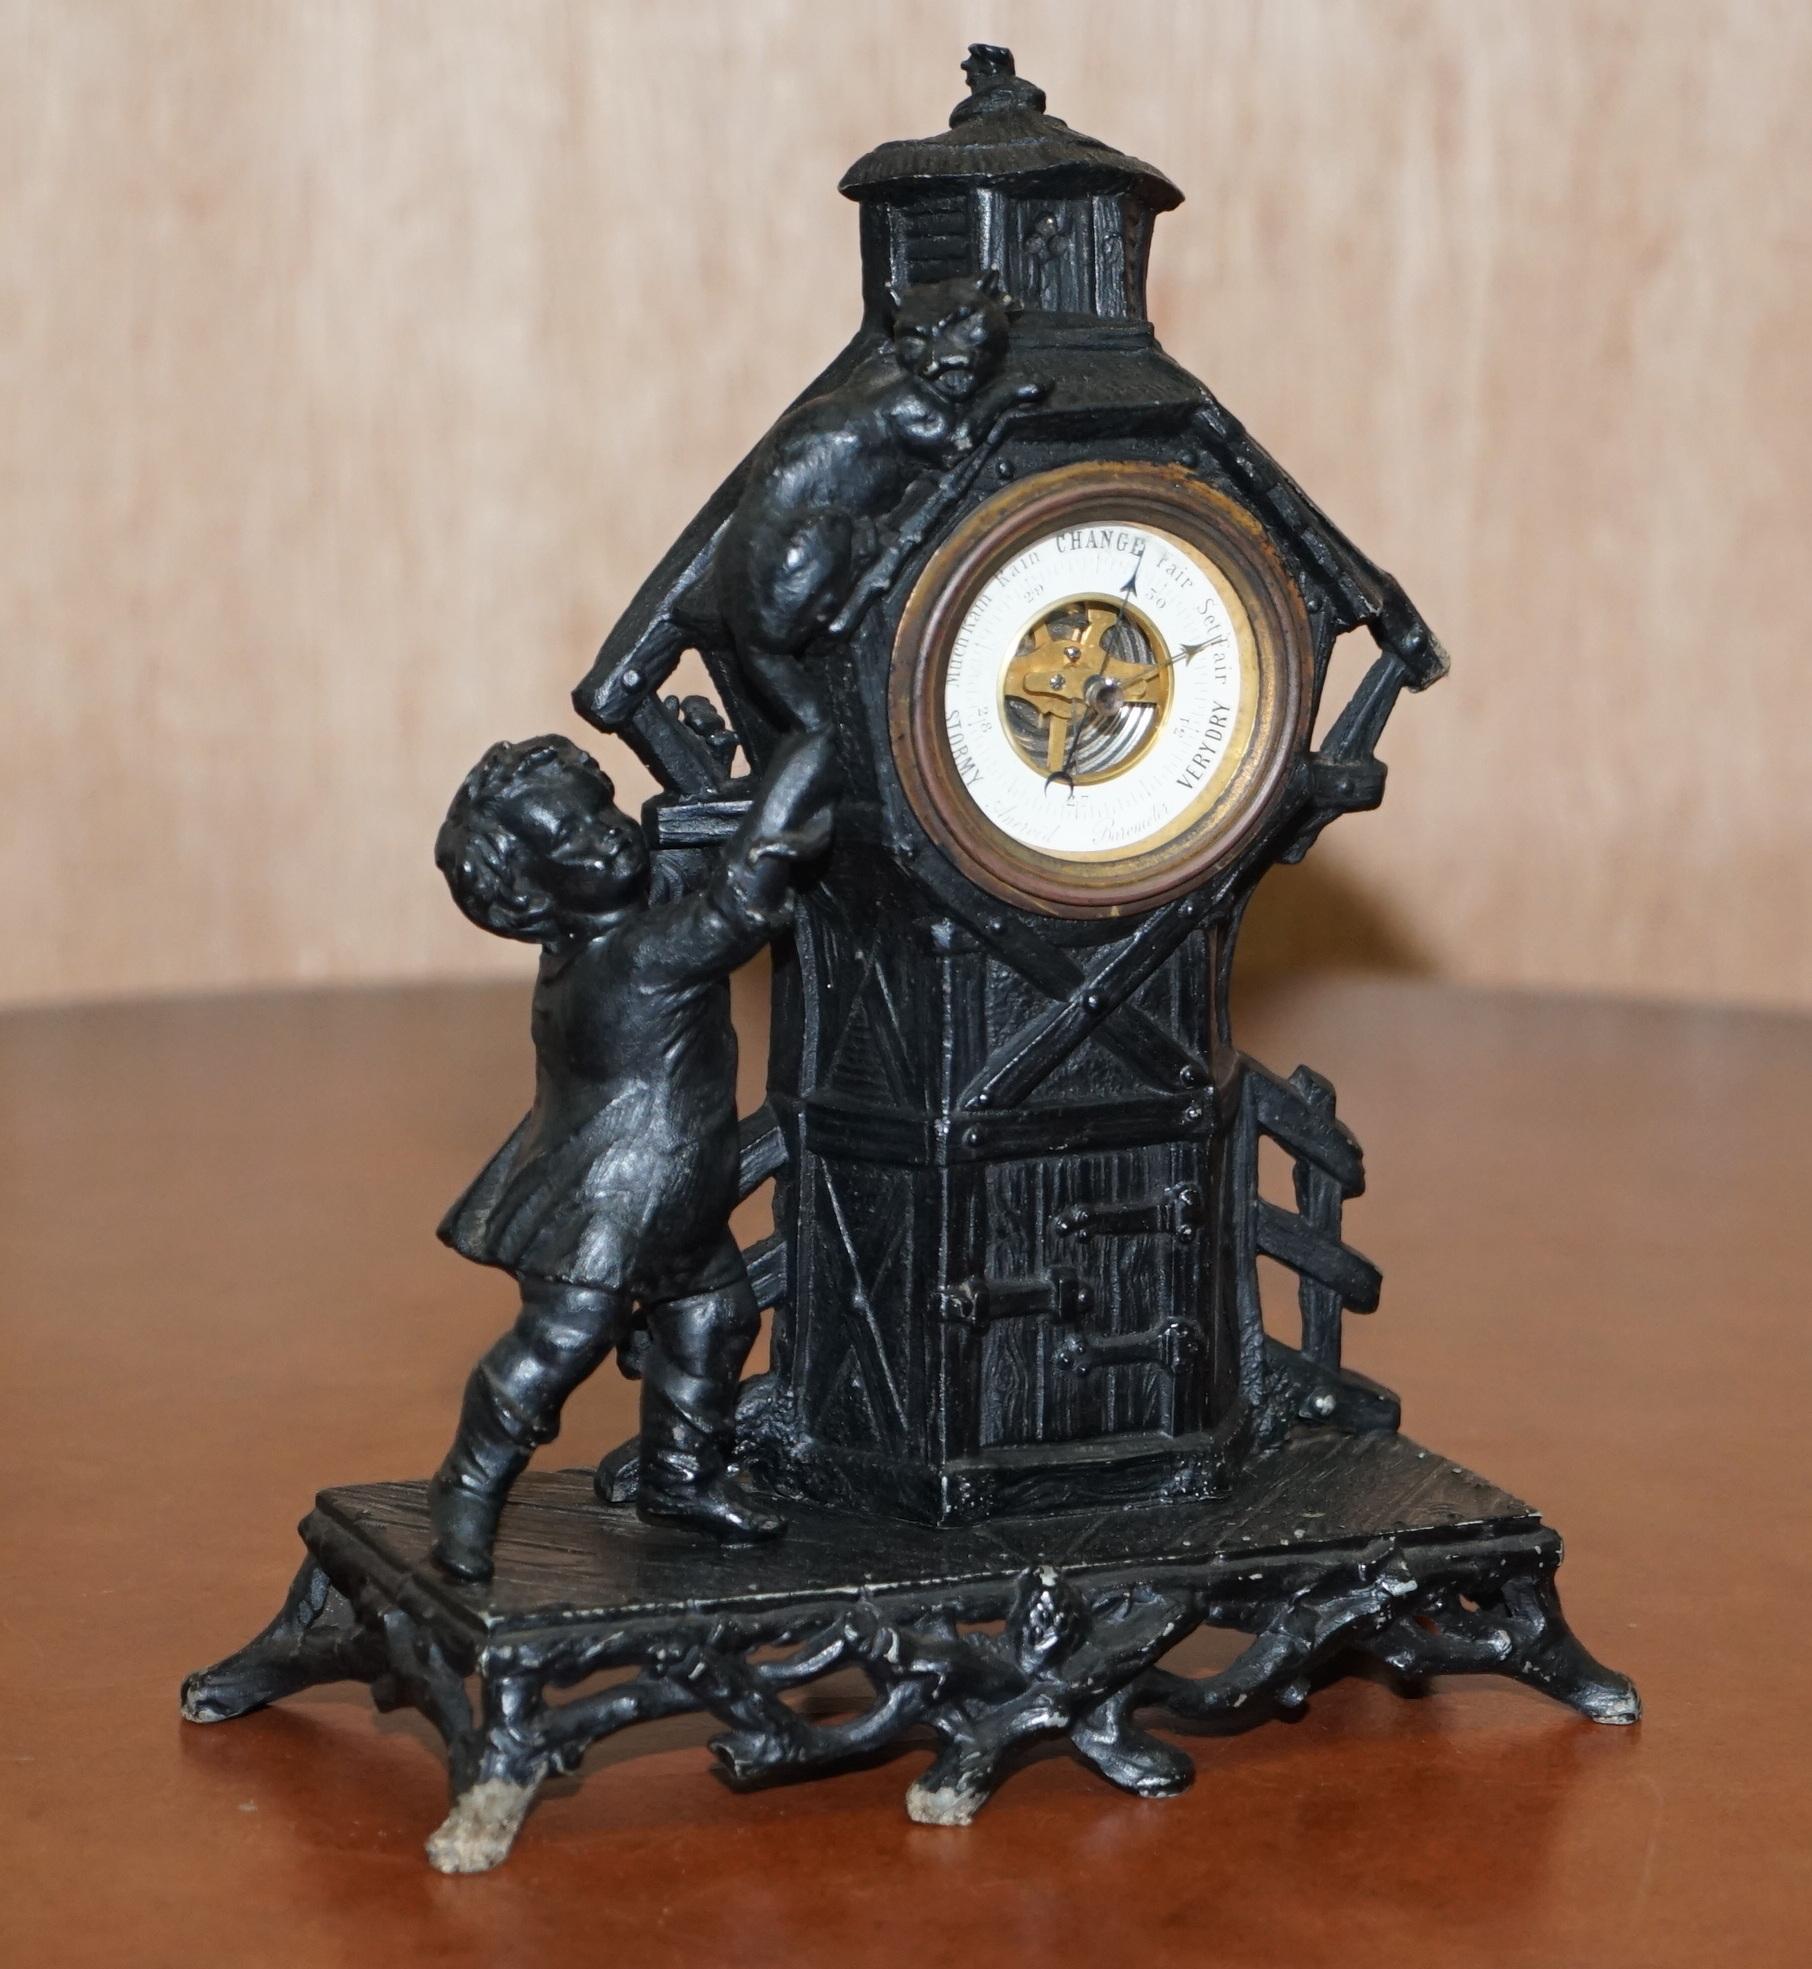 We are delighted to offer for sale this Victorian boy chasing a cat cast iron aneroid barometer

Dimensions:

Height 27cm

Width 23cm

Depth 9.5cm

Please note all measurements are taken at the widest point

This item is available for